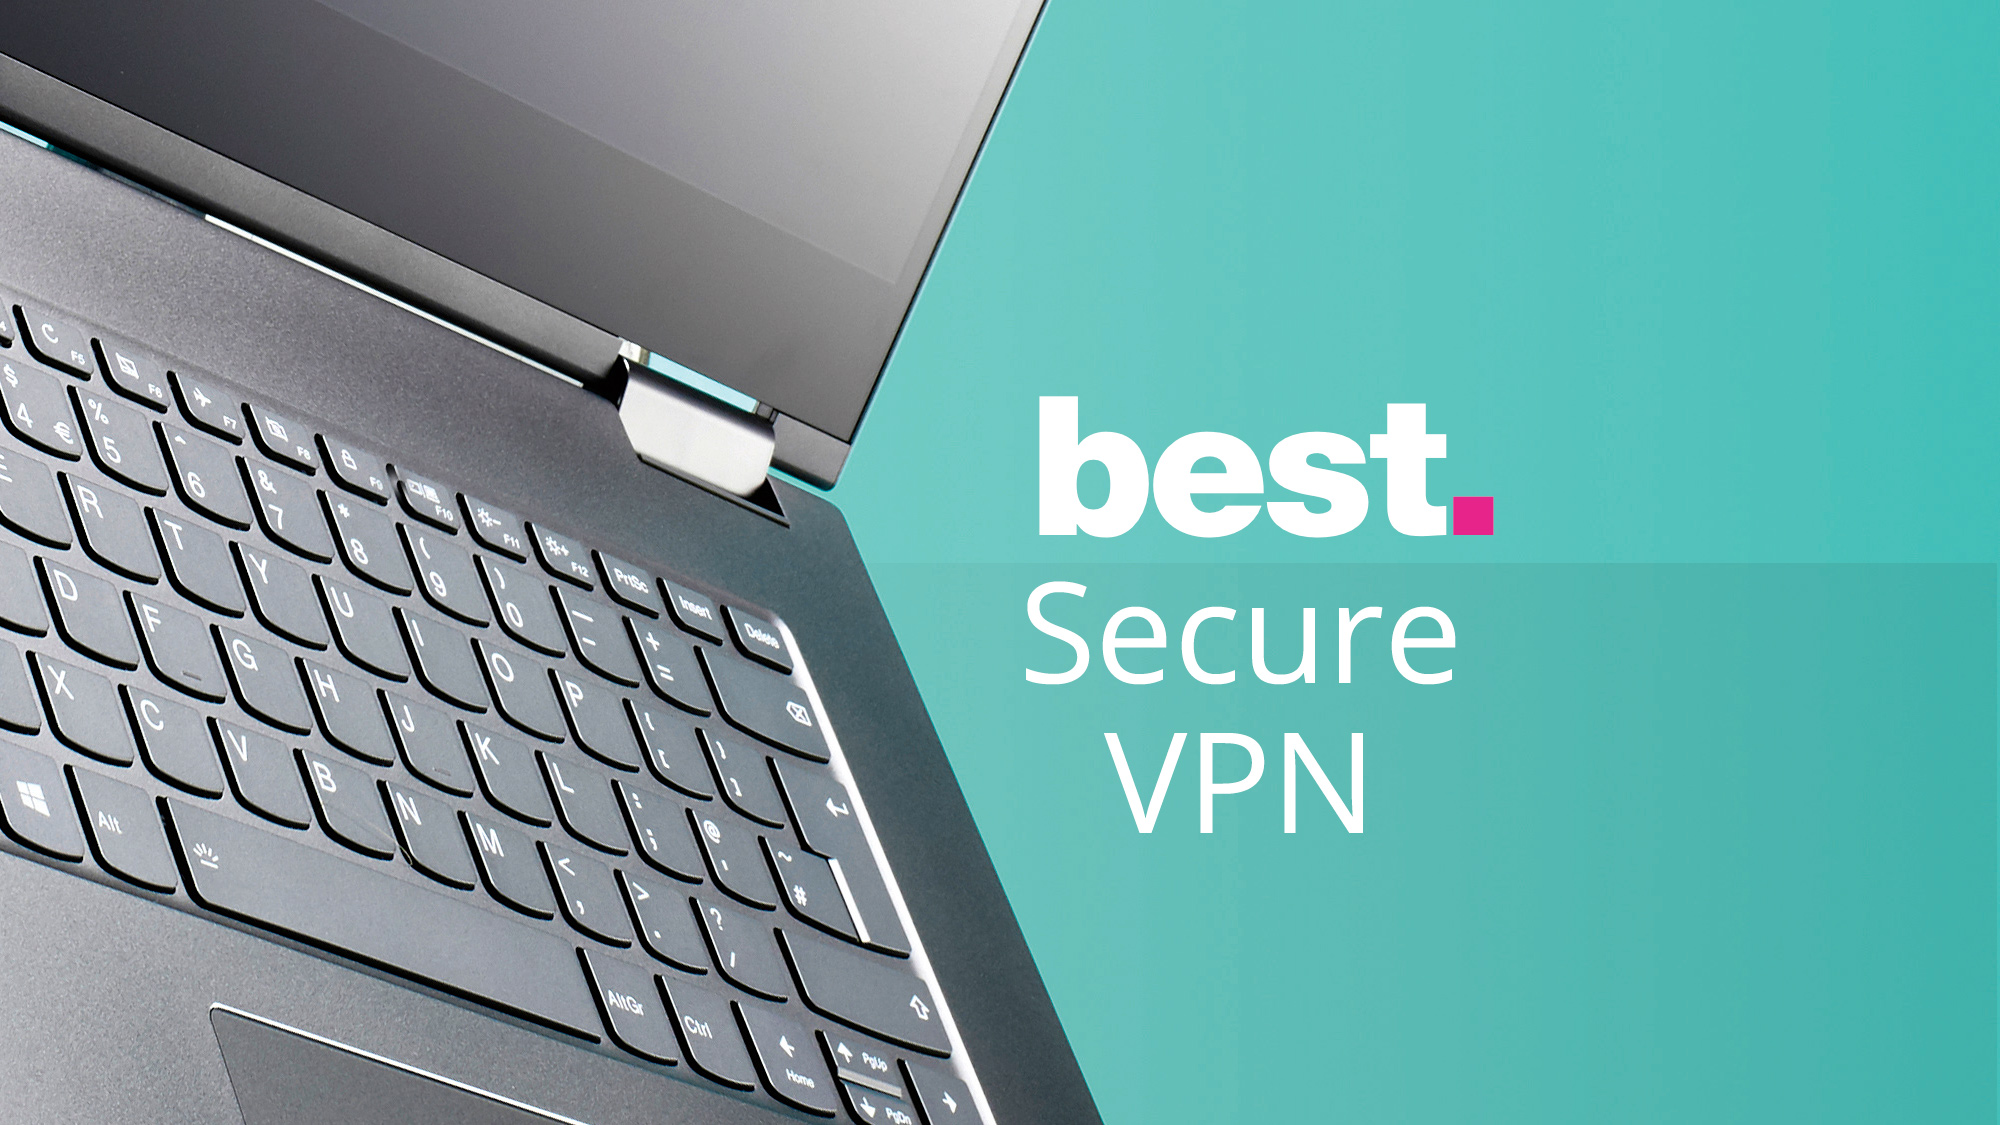 vpn then using secure pipes